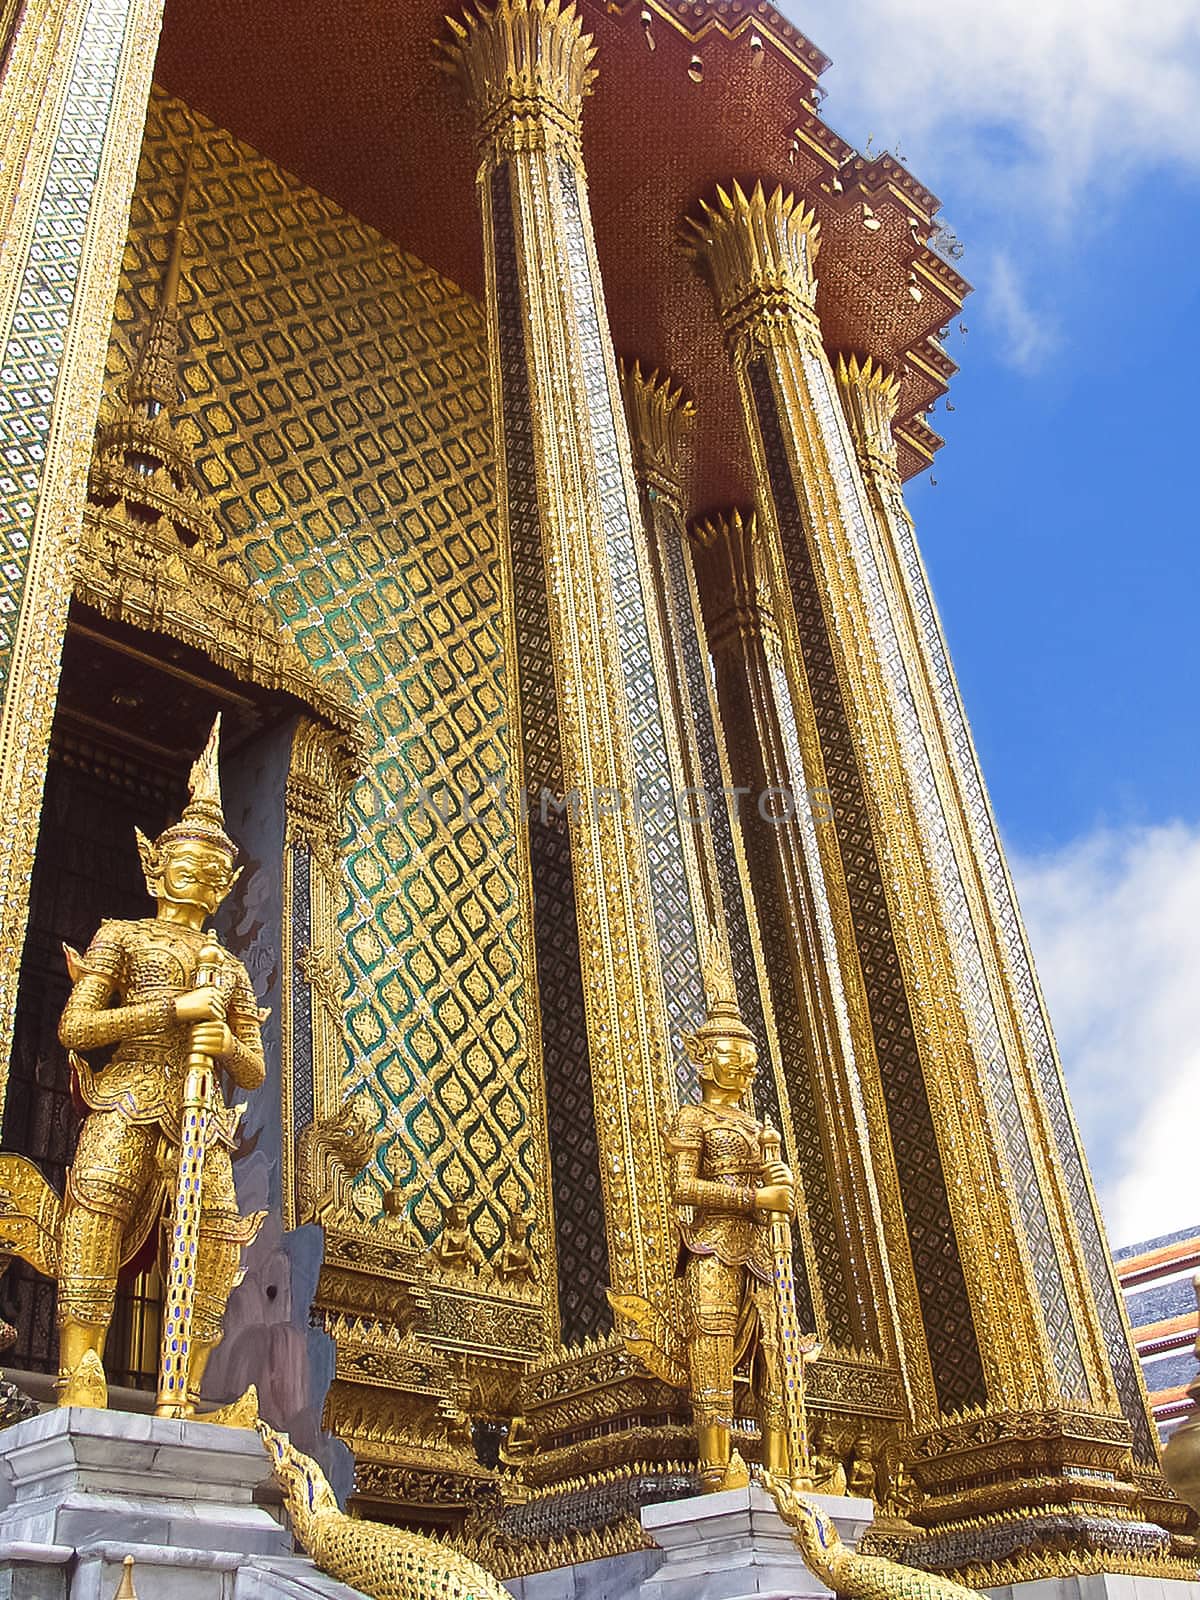 Guards of the temple Wat Phra Kaew in the Grand Palace in bangkok, Thailand